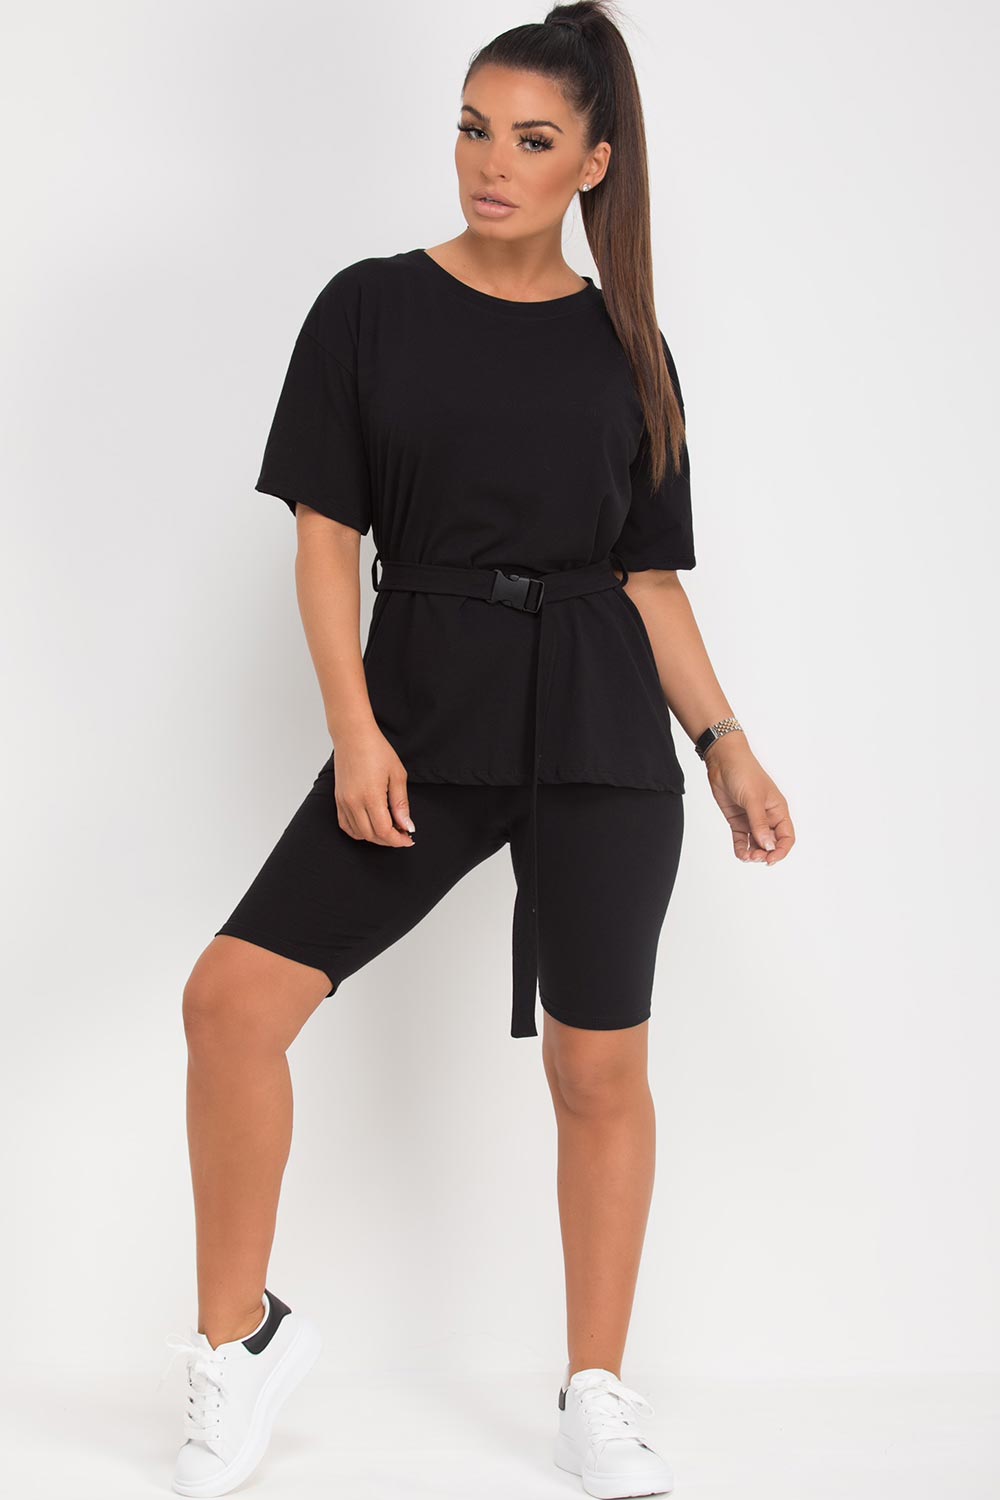 black cycling shorts top with utility belt set 